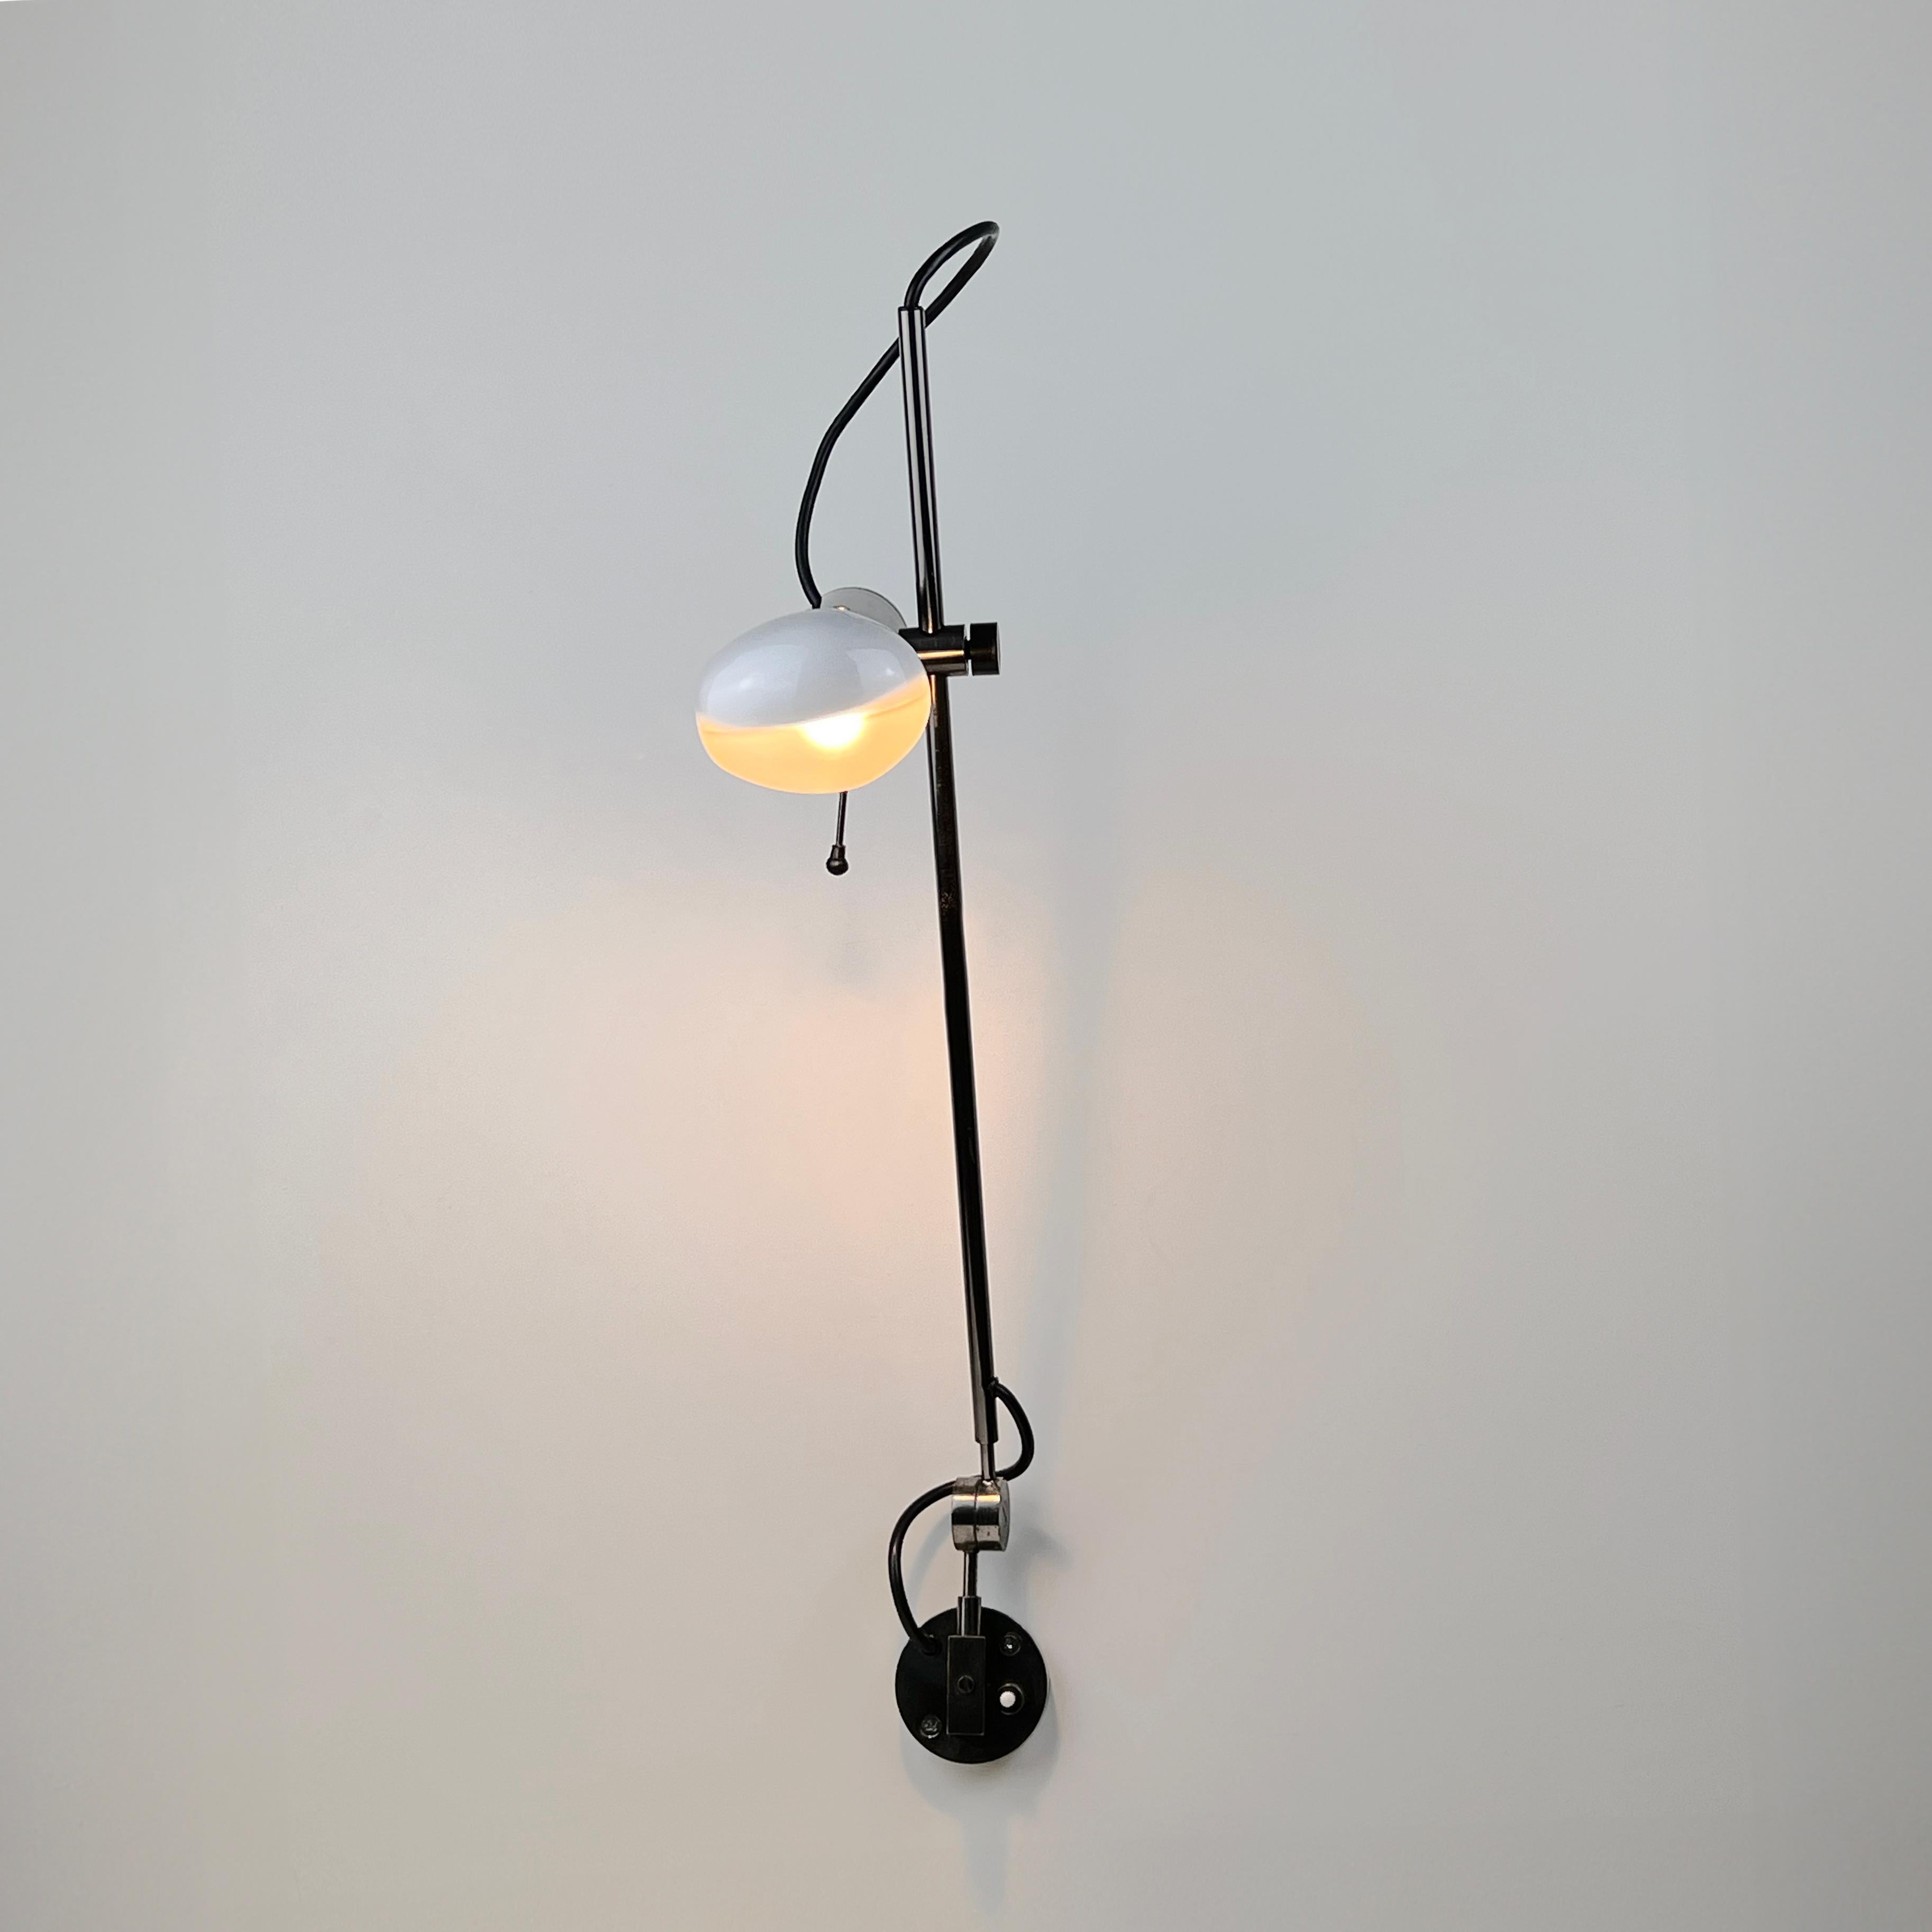 Mid-20th Century Model 194 wall light by Tito Agnoli for Oluce, Italy, 1950s For Sale